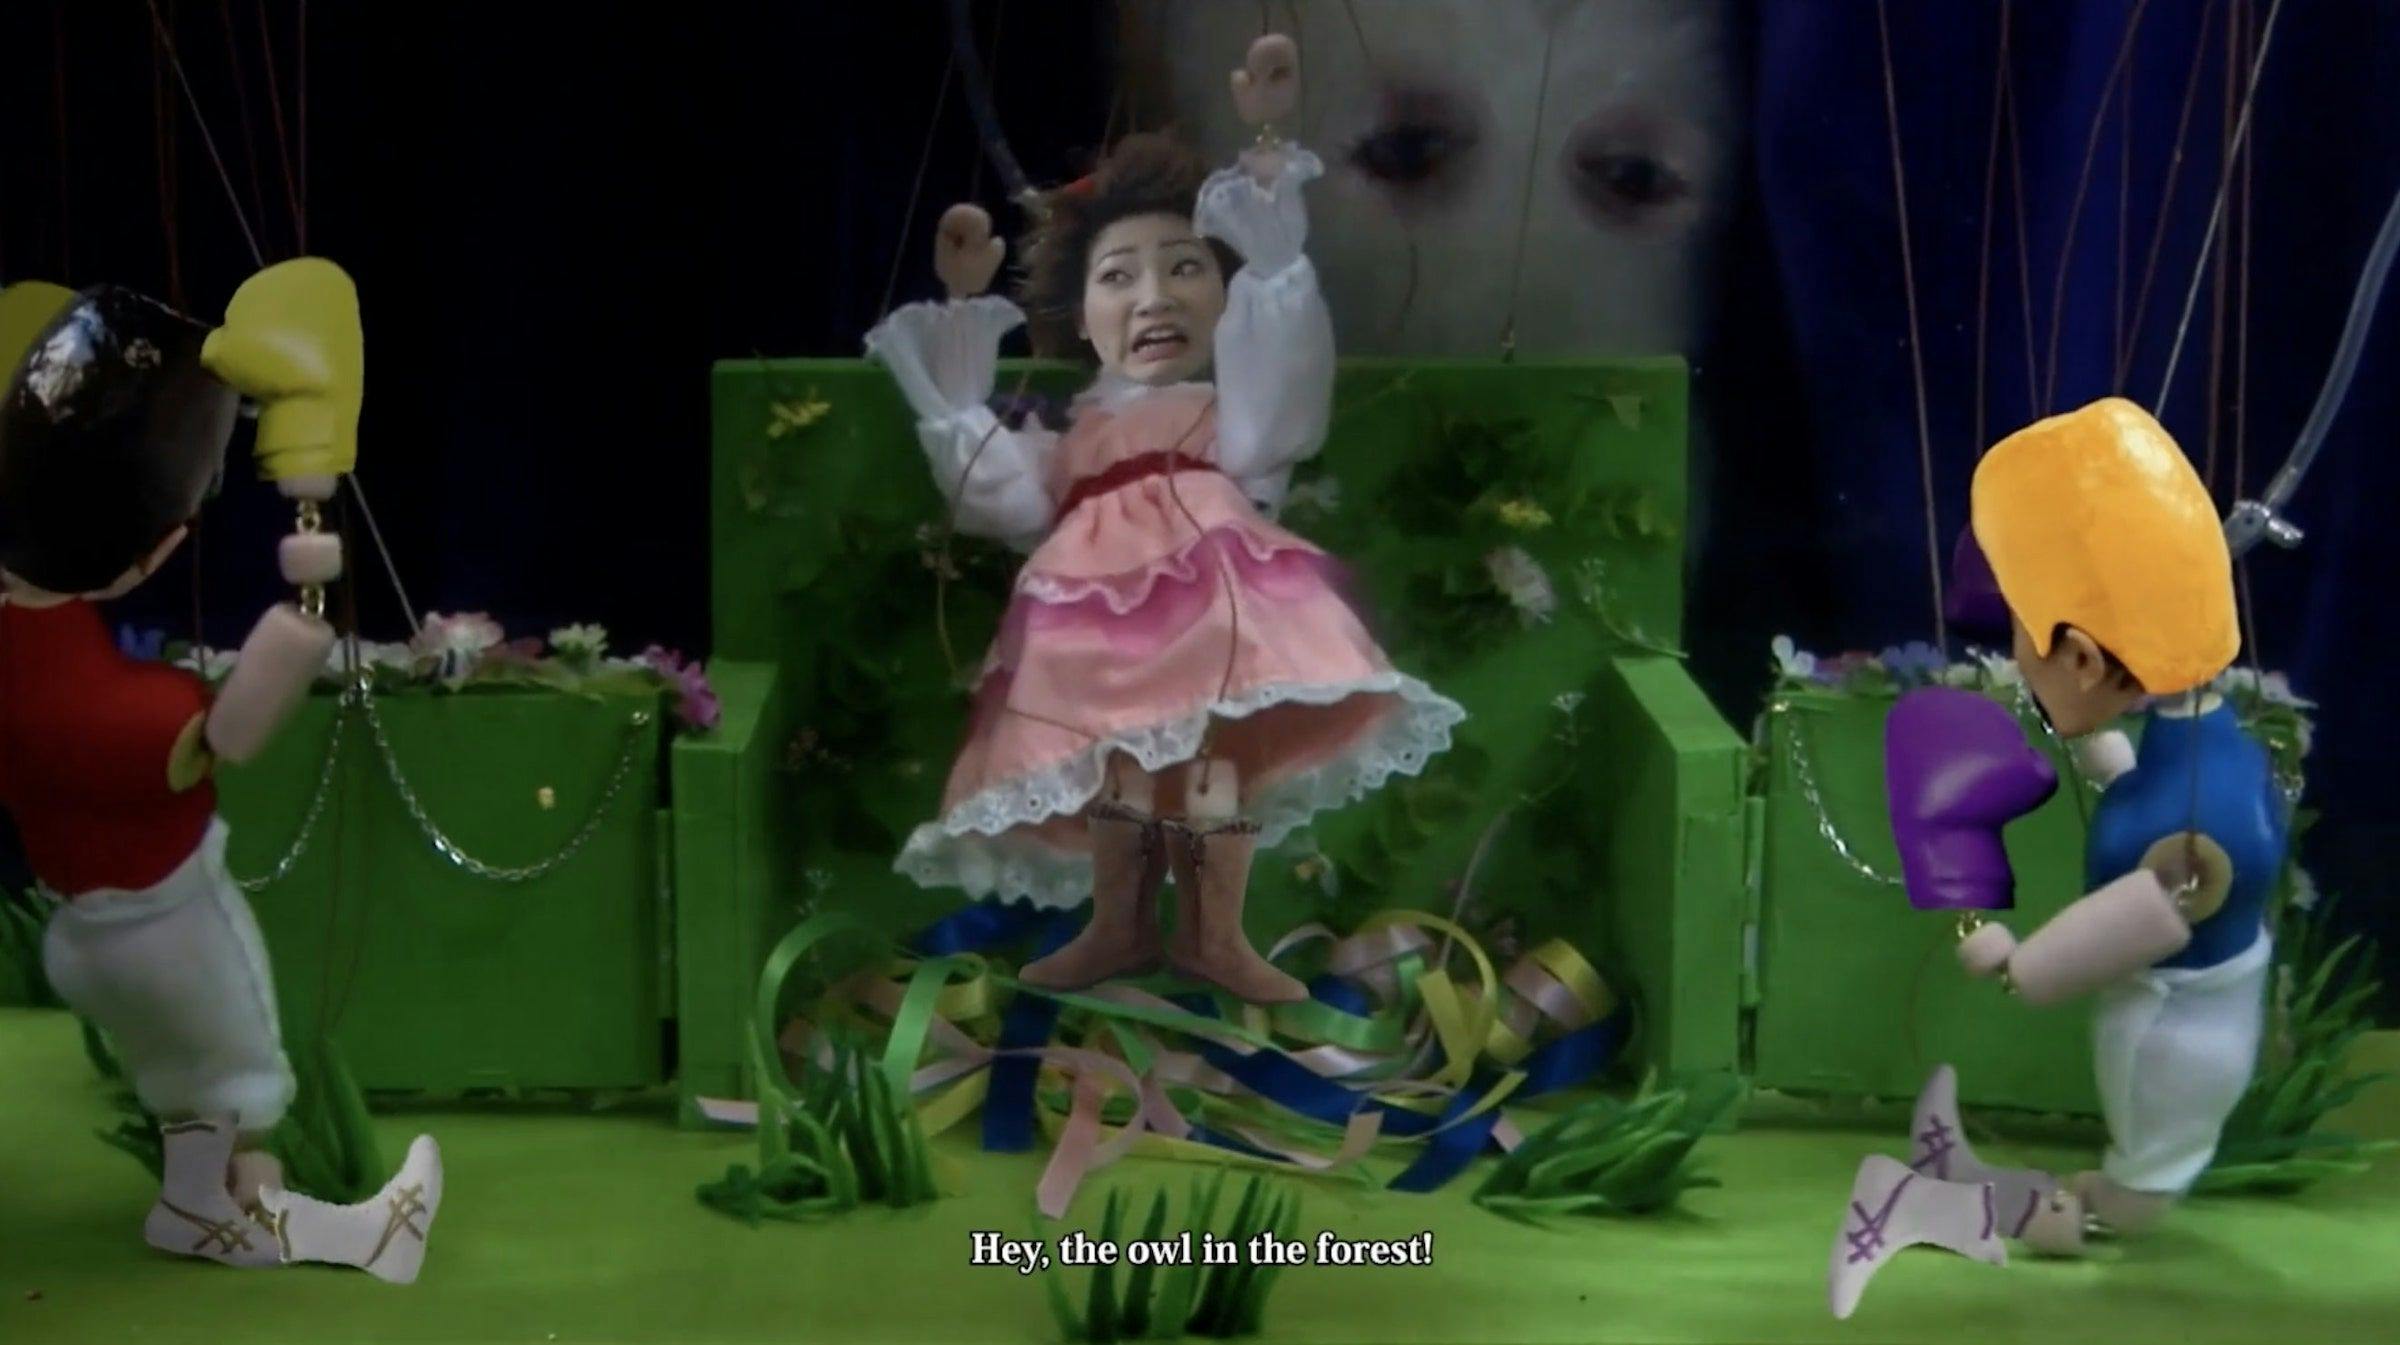 a puppet has her arms up in the air in fright. She is wearing a pink dress. 2 other puppets with yellow helmets and boxing gloves face her in confrontation.